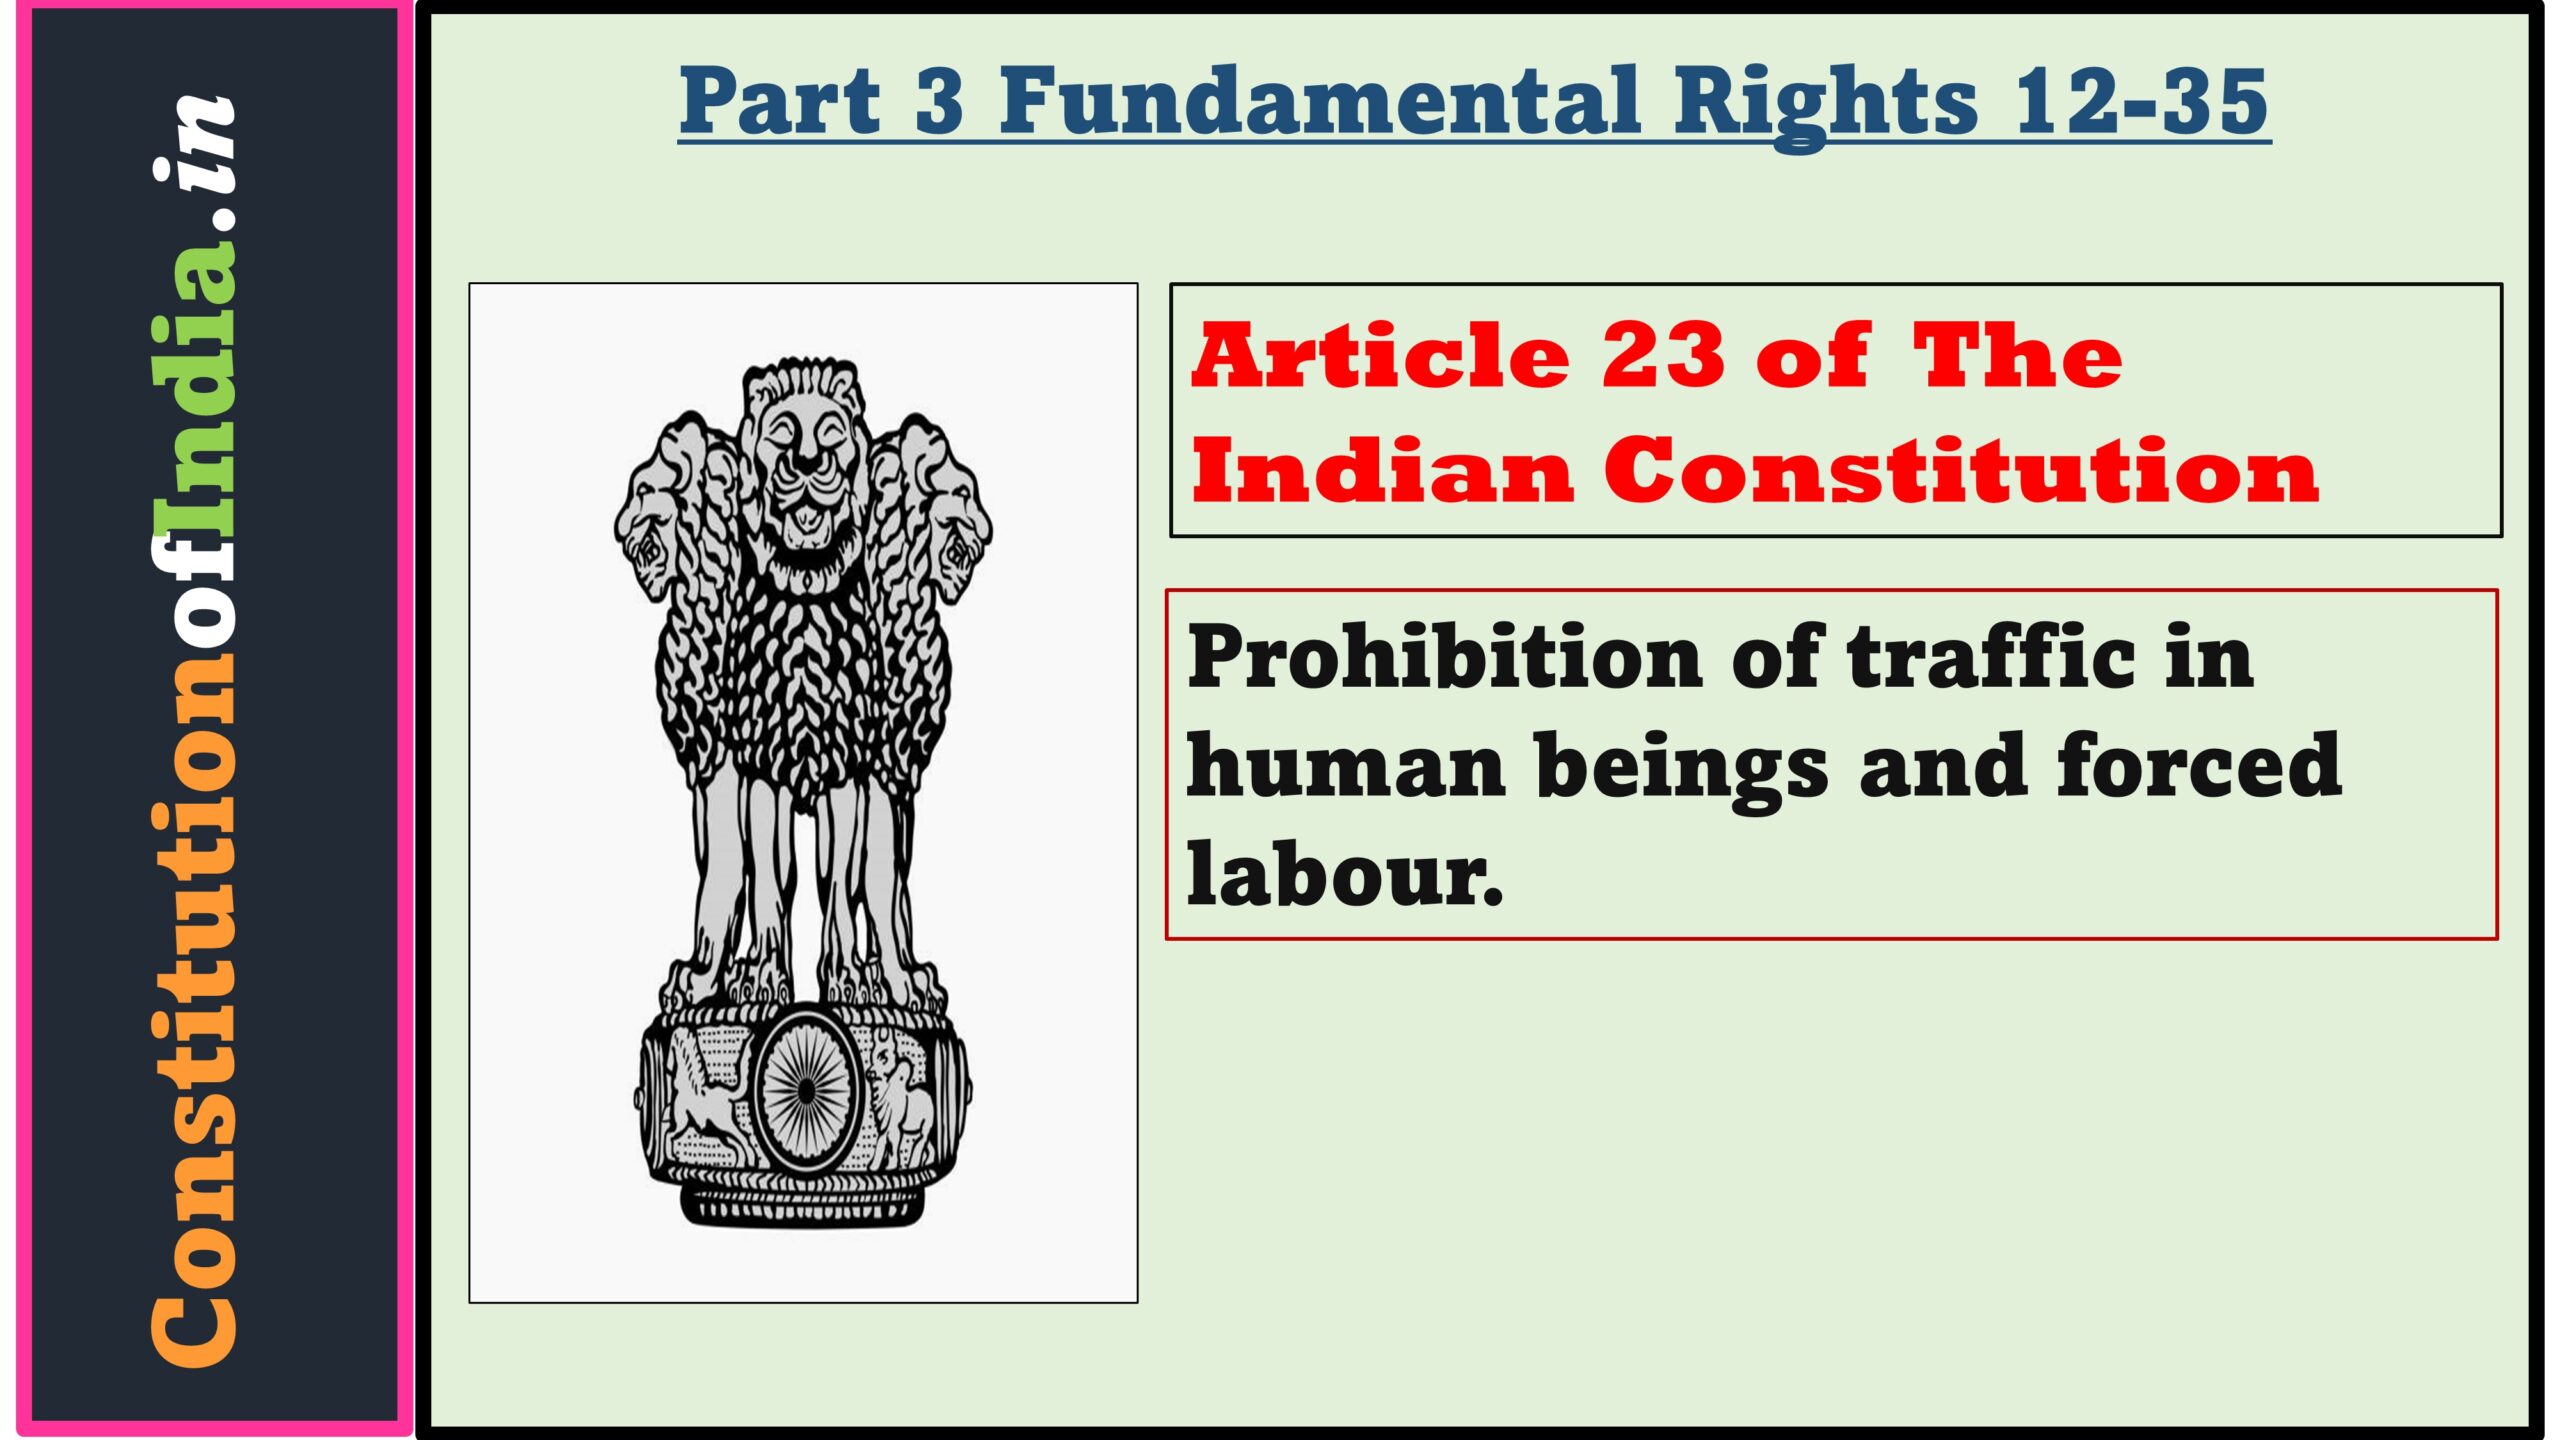 Article 23 of Indian Constitution